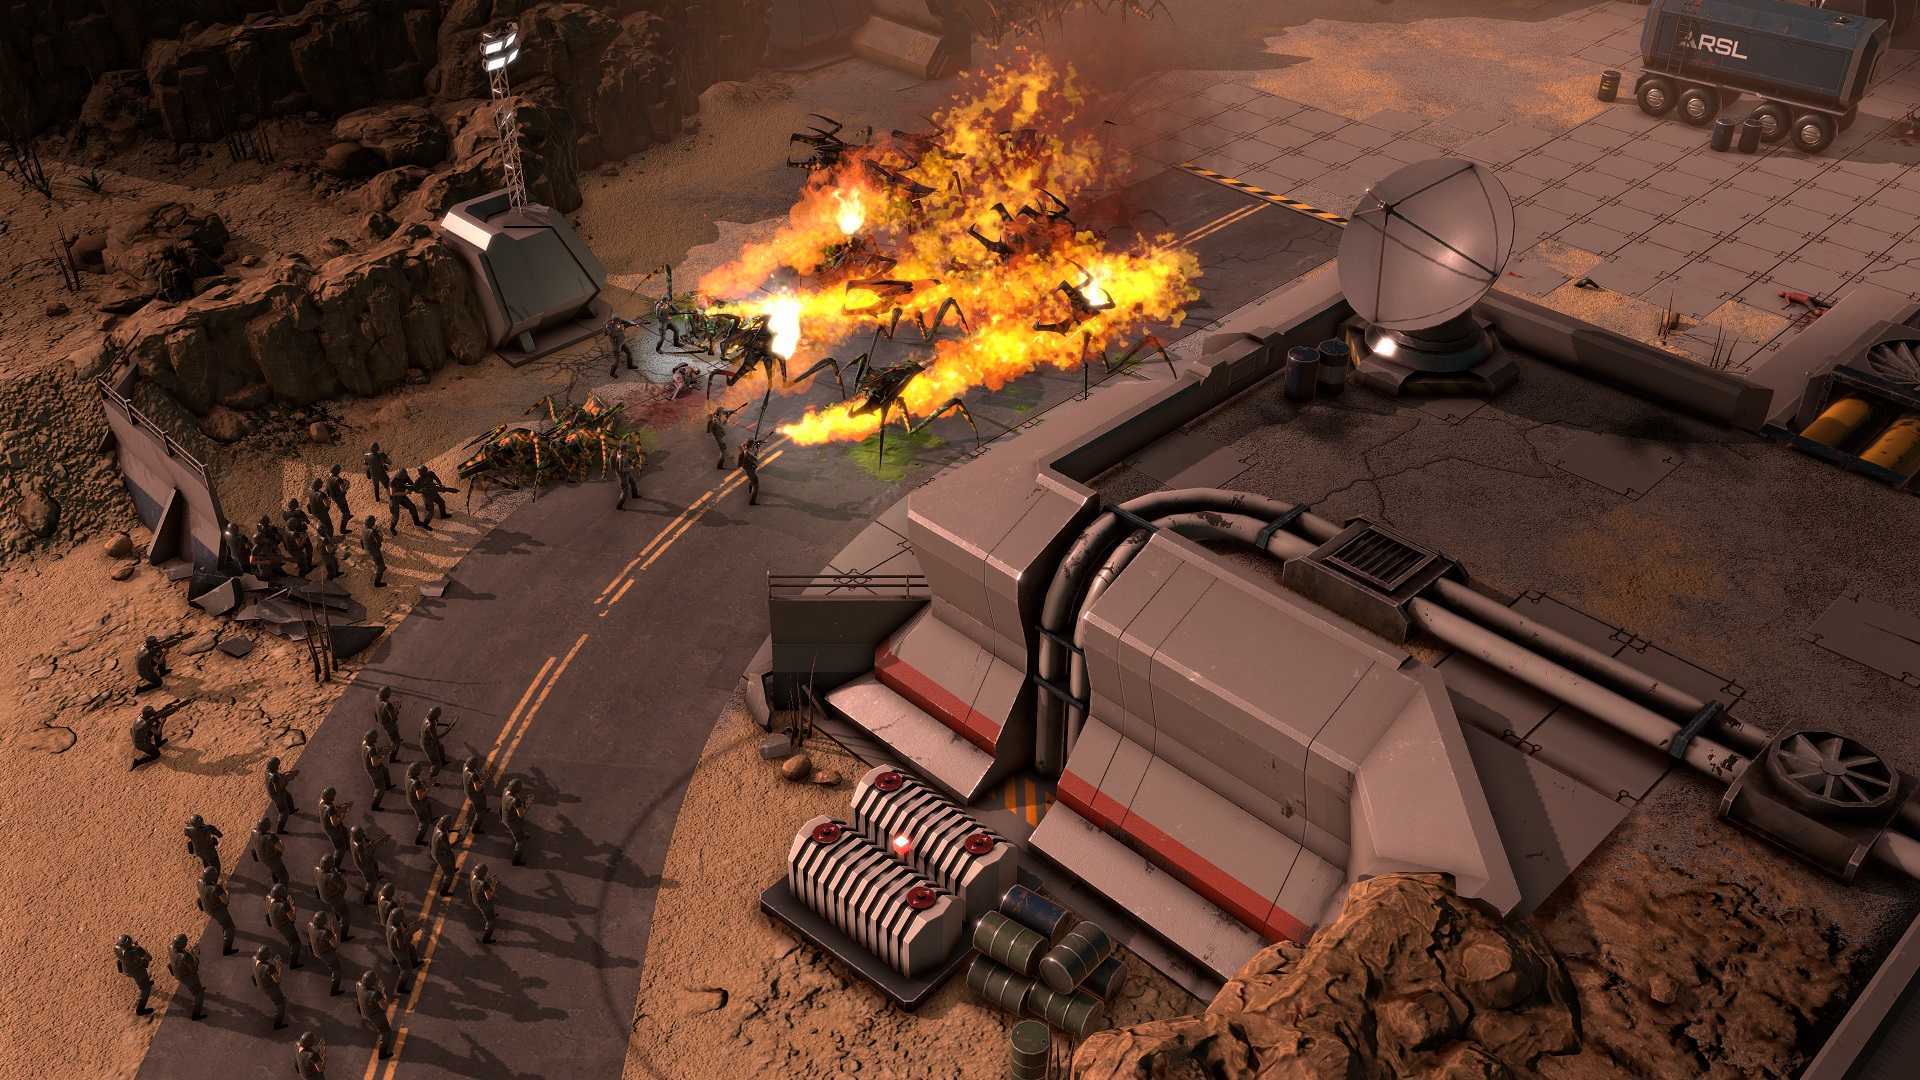 Starship Troopers: Terran Command gets a playable demo next week